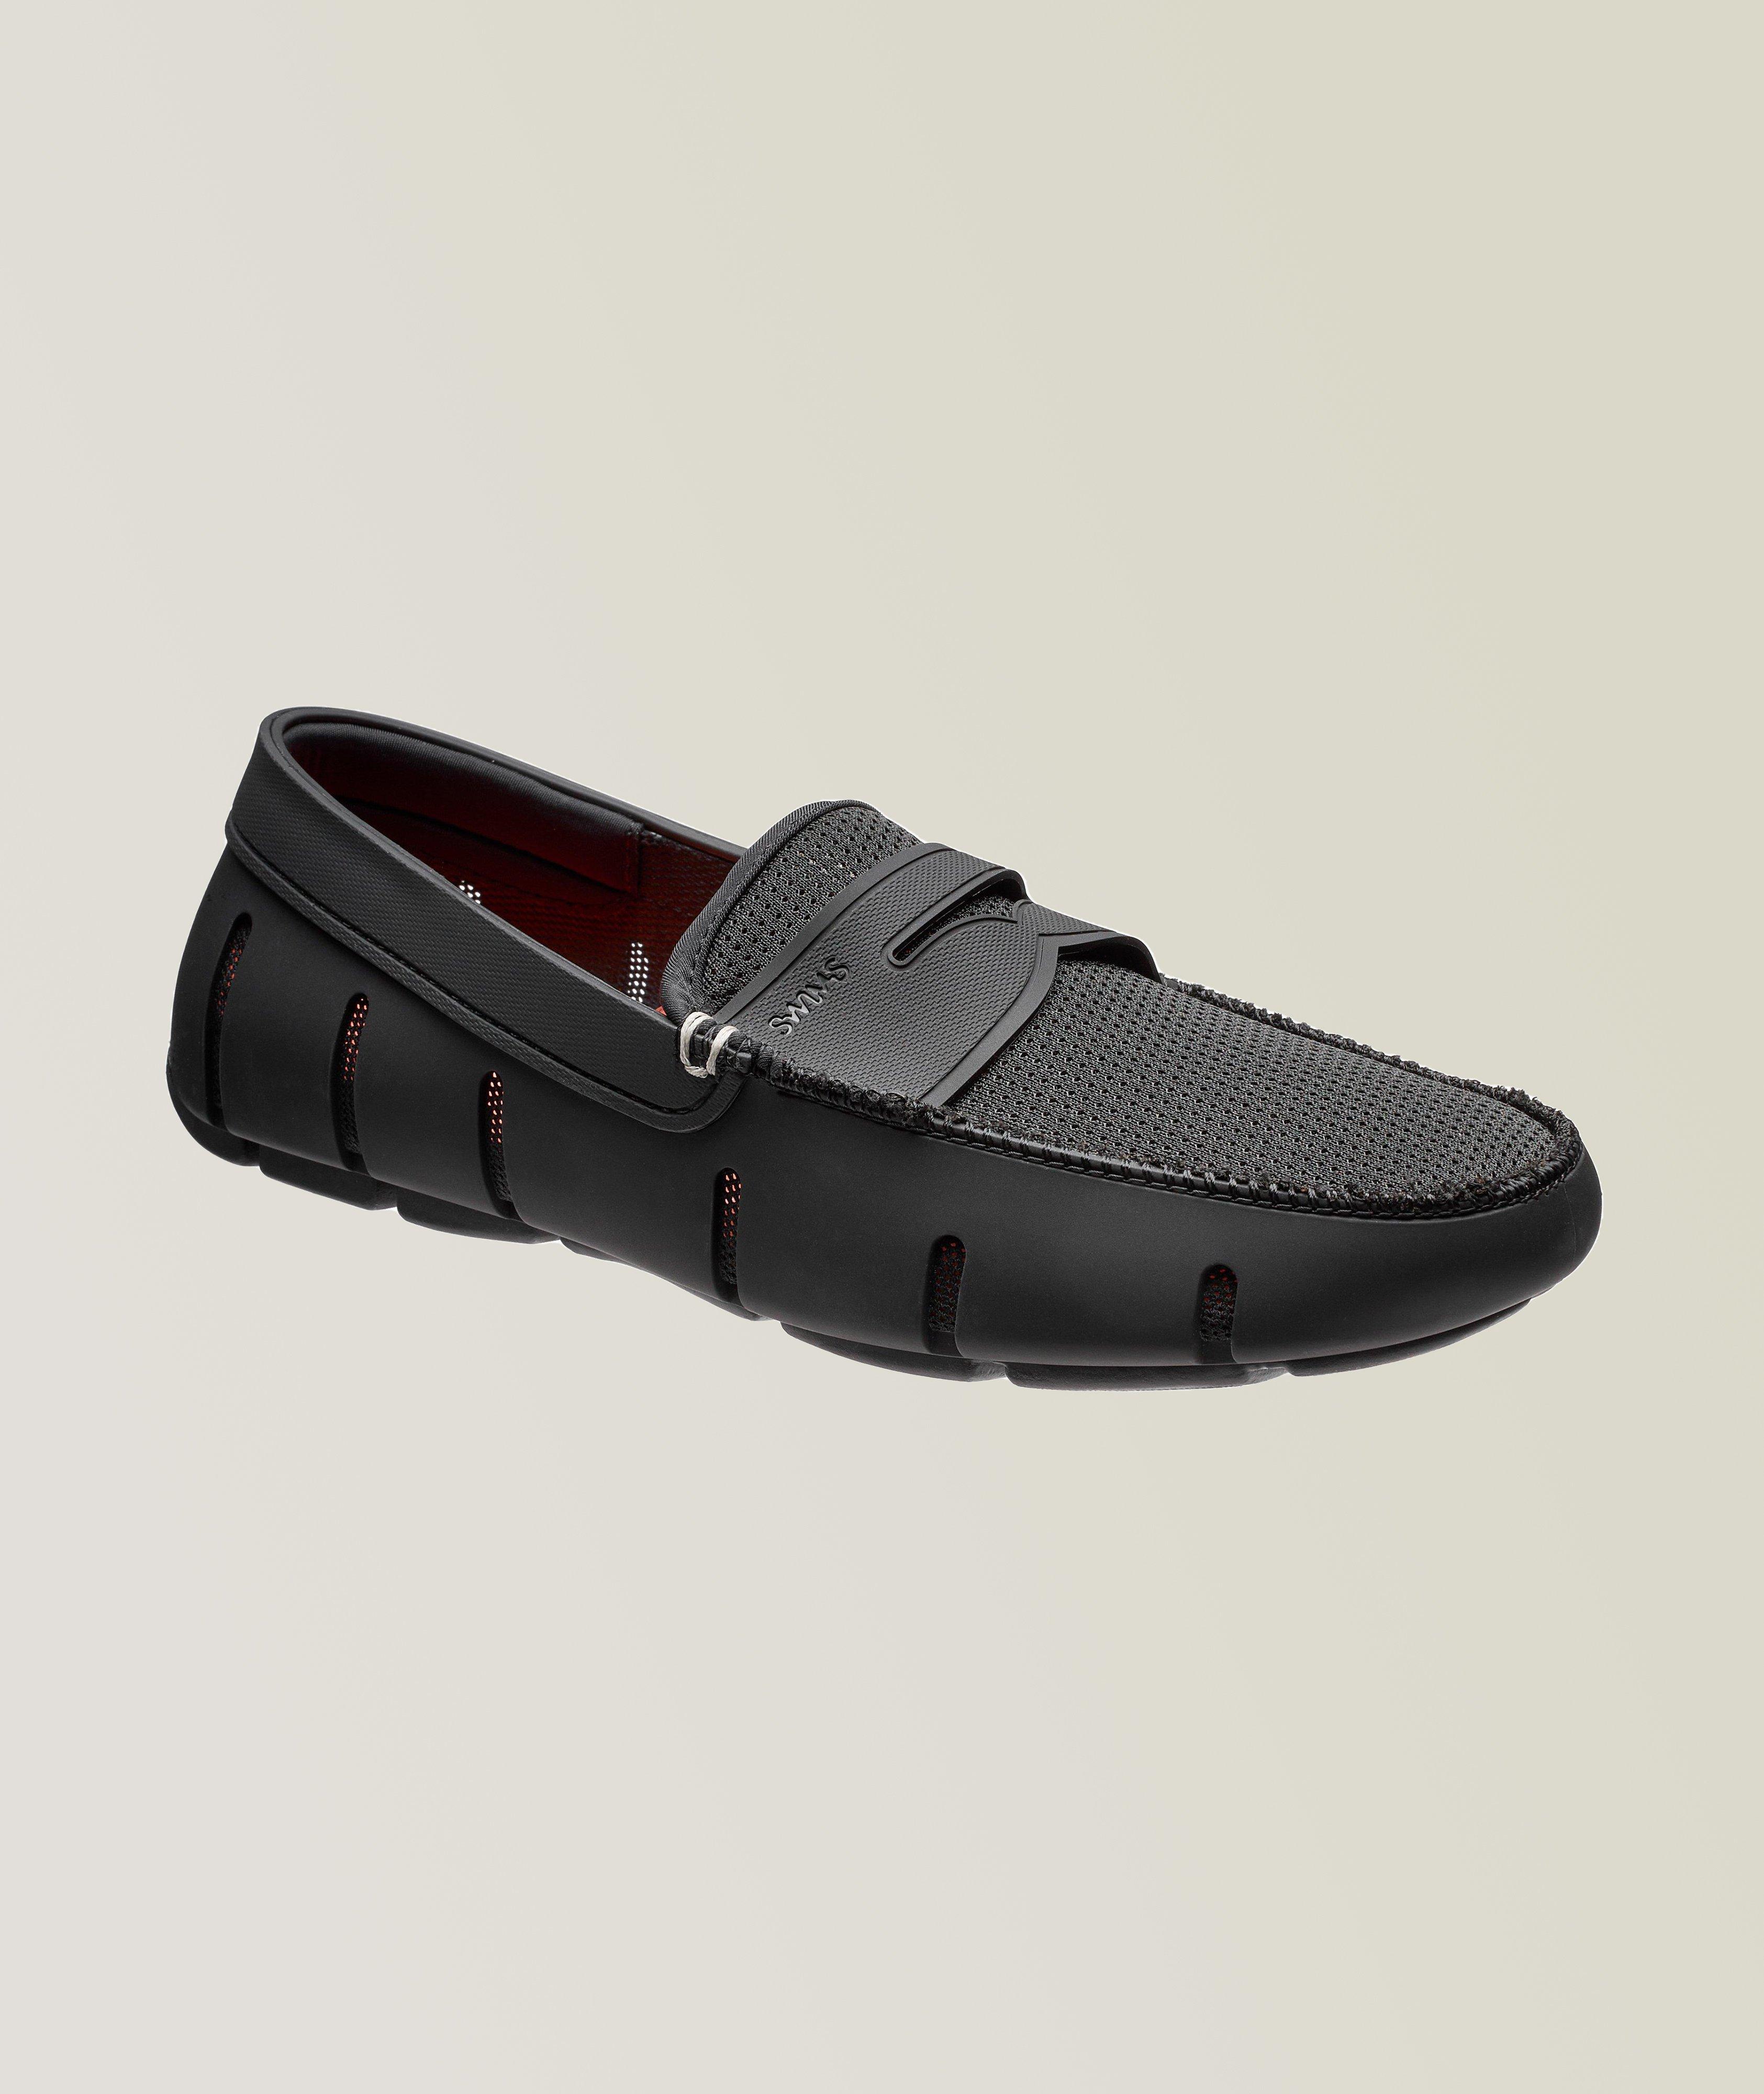 Classic Penny Loafers image 0